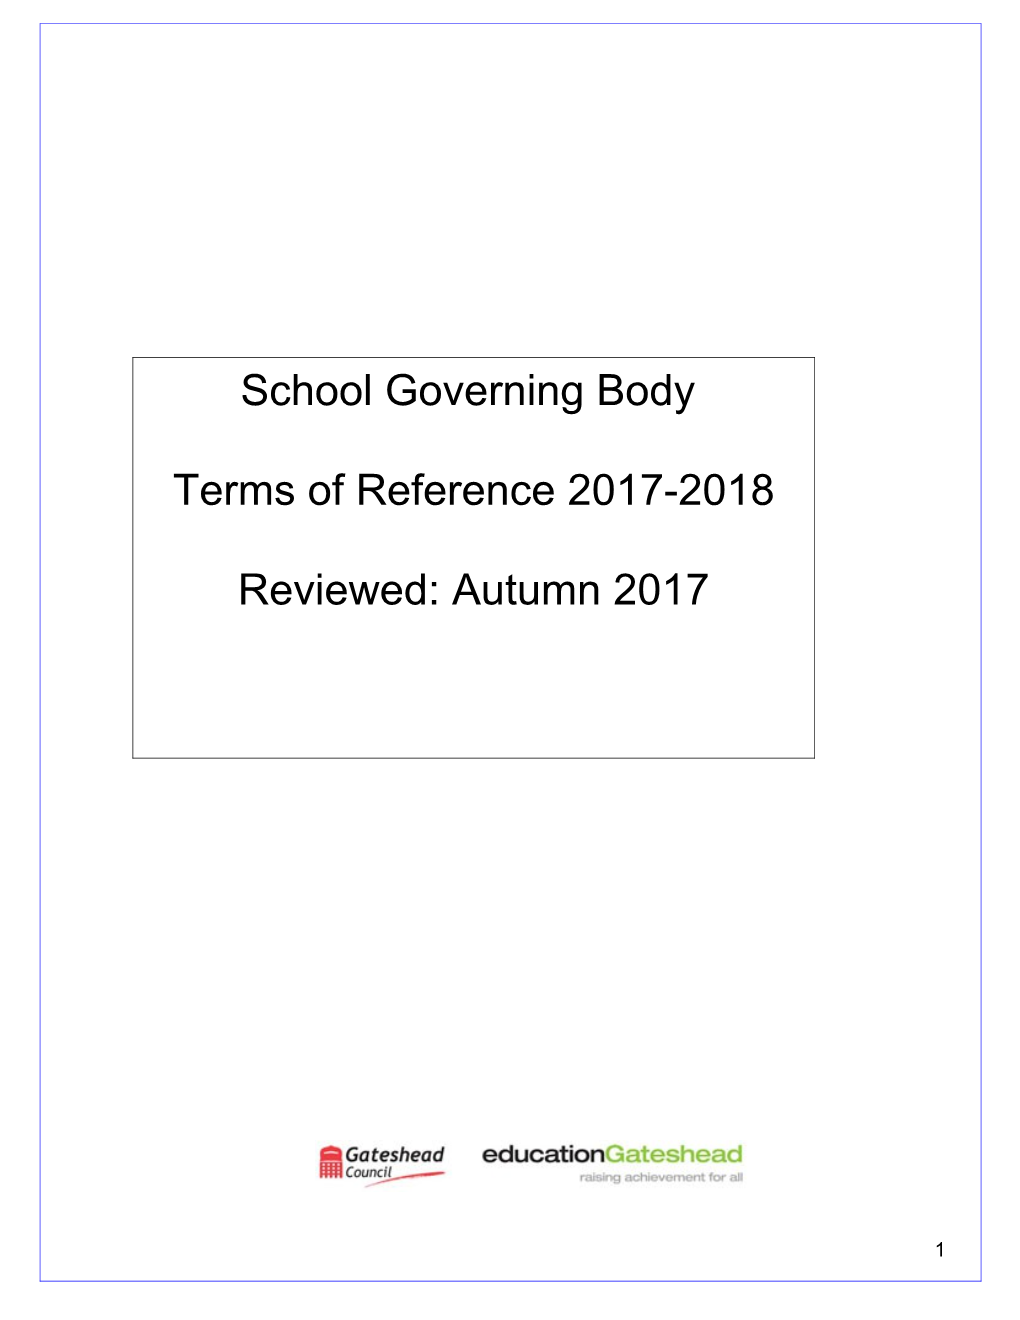 Governing Body Committee Model Terms of Reference